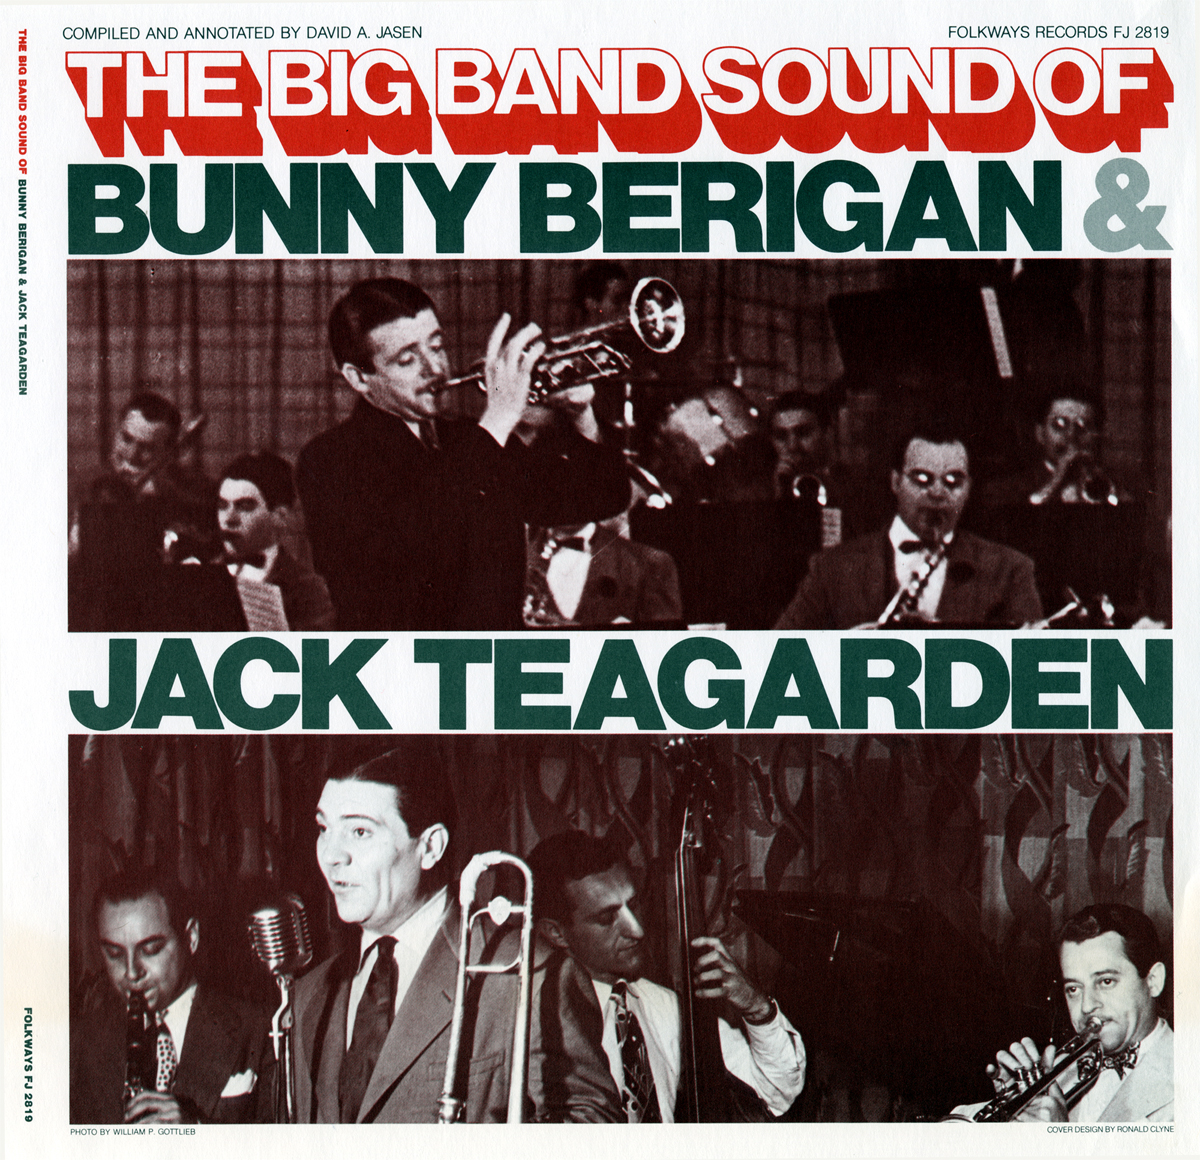 THE BIG BAND SOUNDS OF BUNNY BERIGAN AND JACK